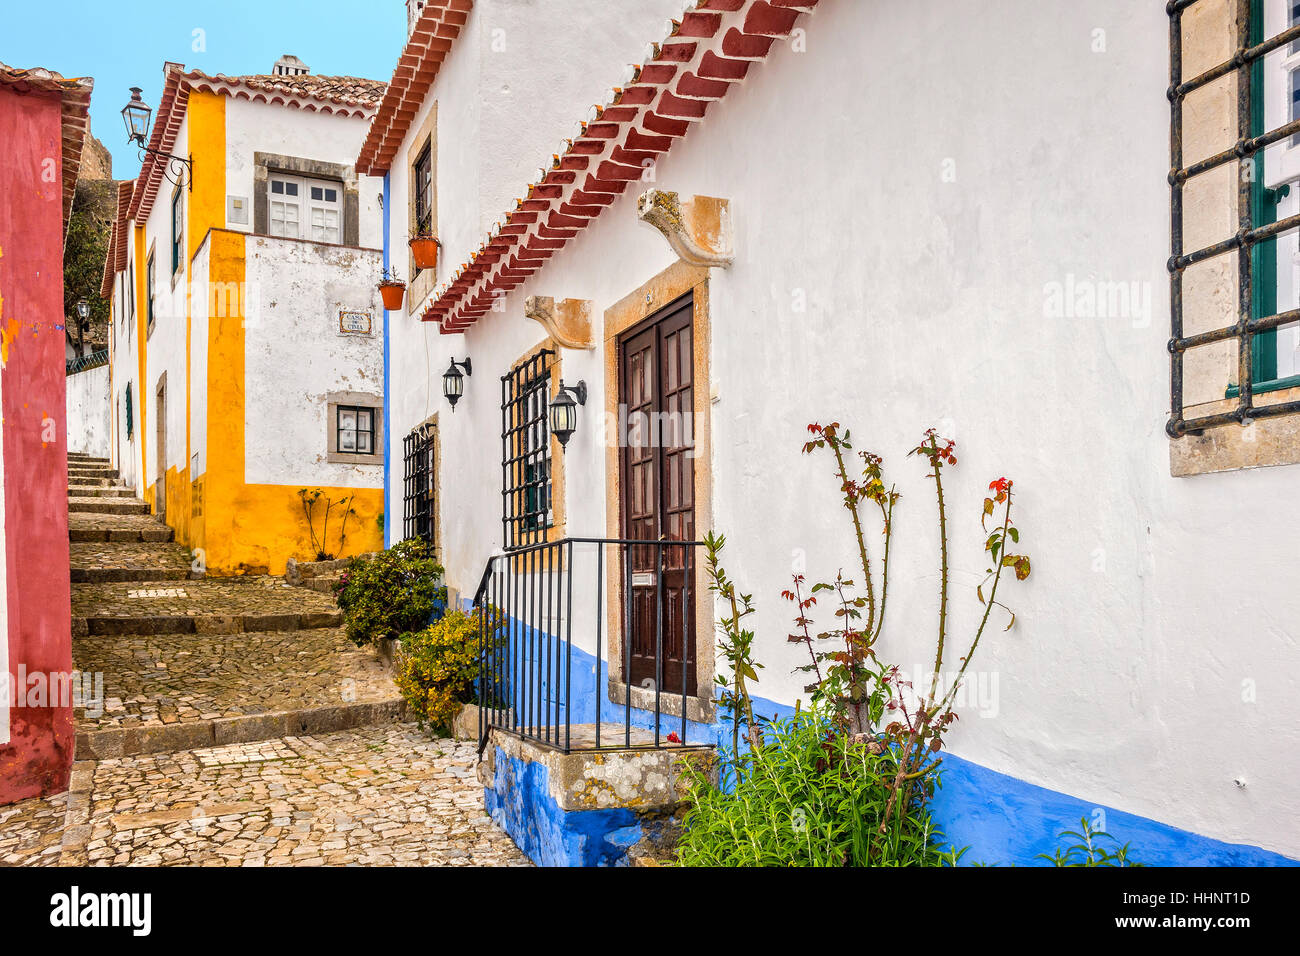 Alleyway in The Medieval Town Of Obidos Portugal Stock Photo